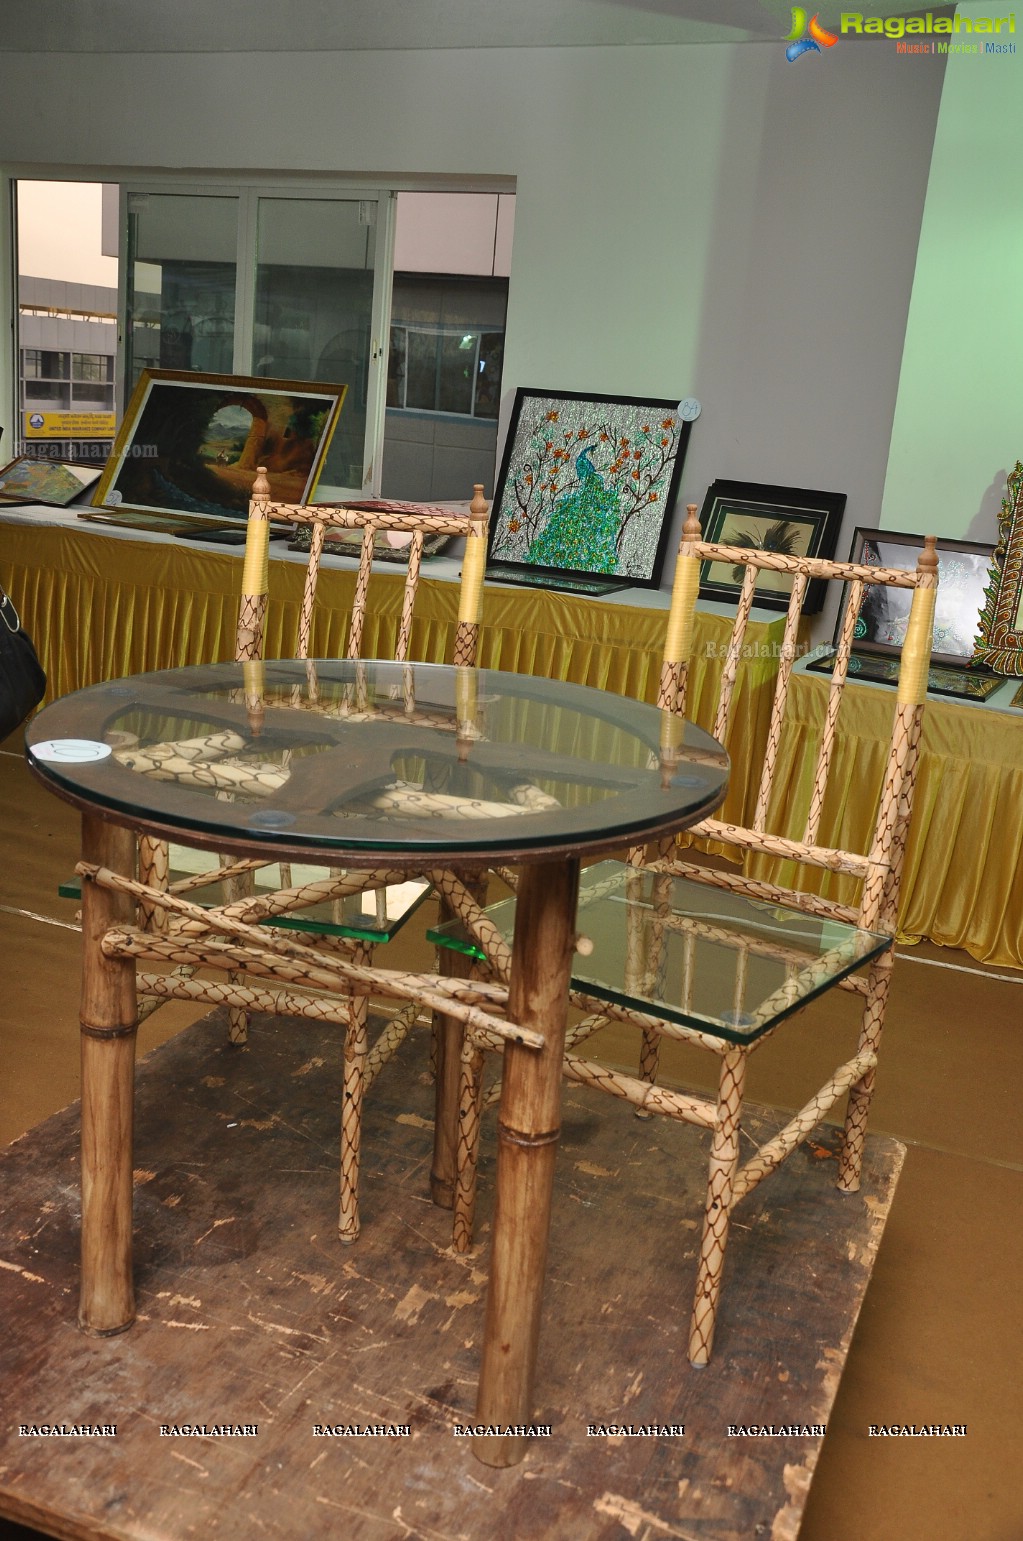 Tattva - The Essence of Design; An Exhibition by Hamstech Interior Design Students